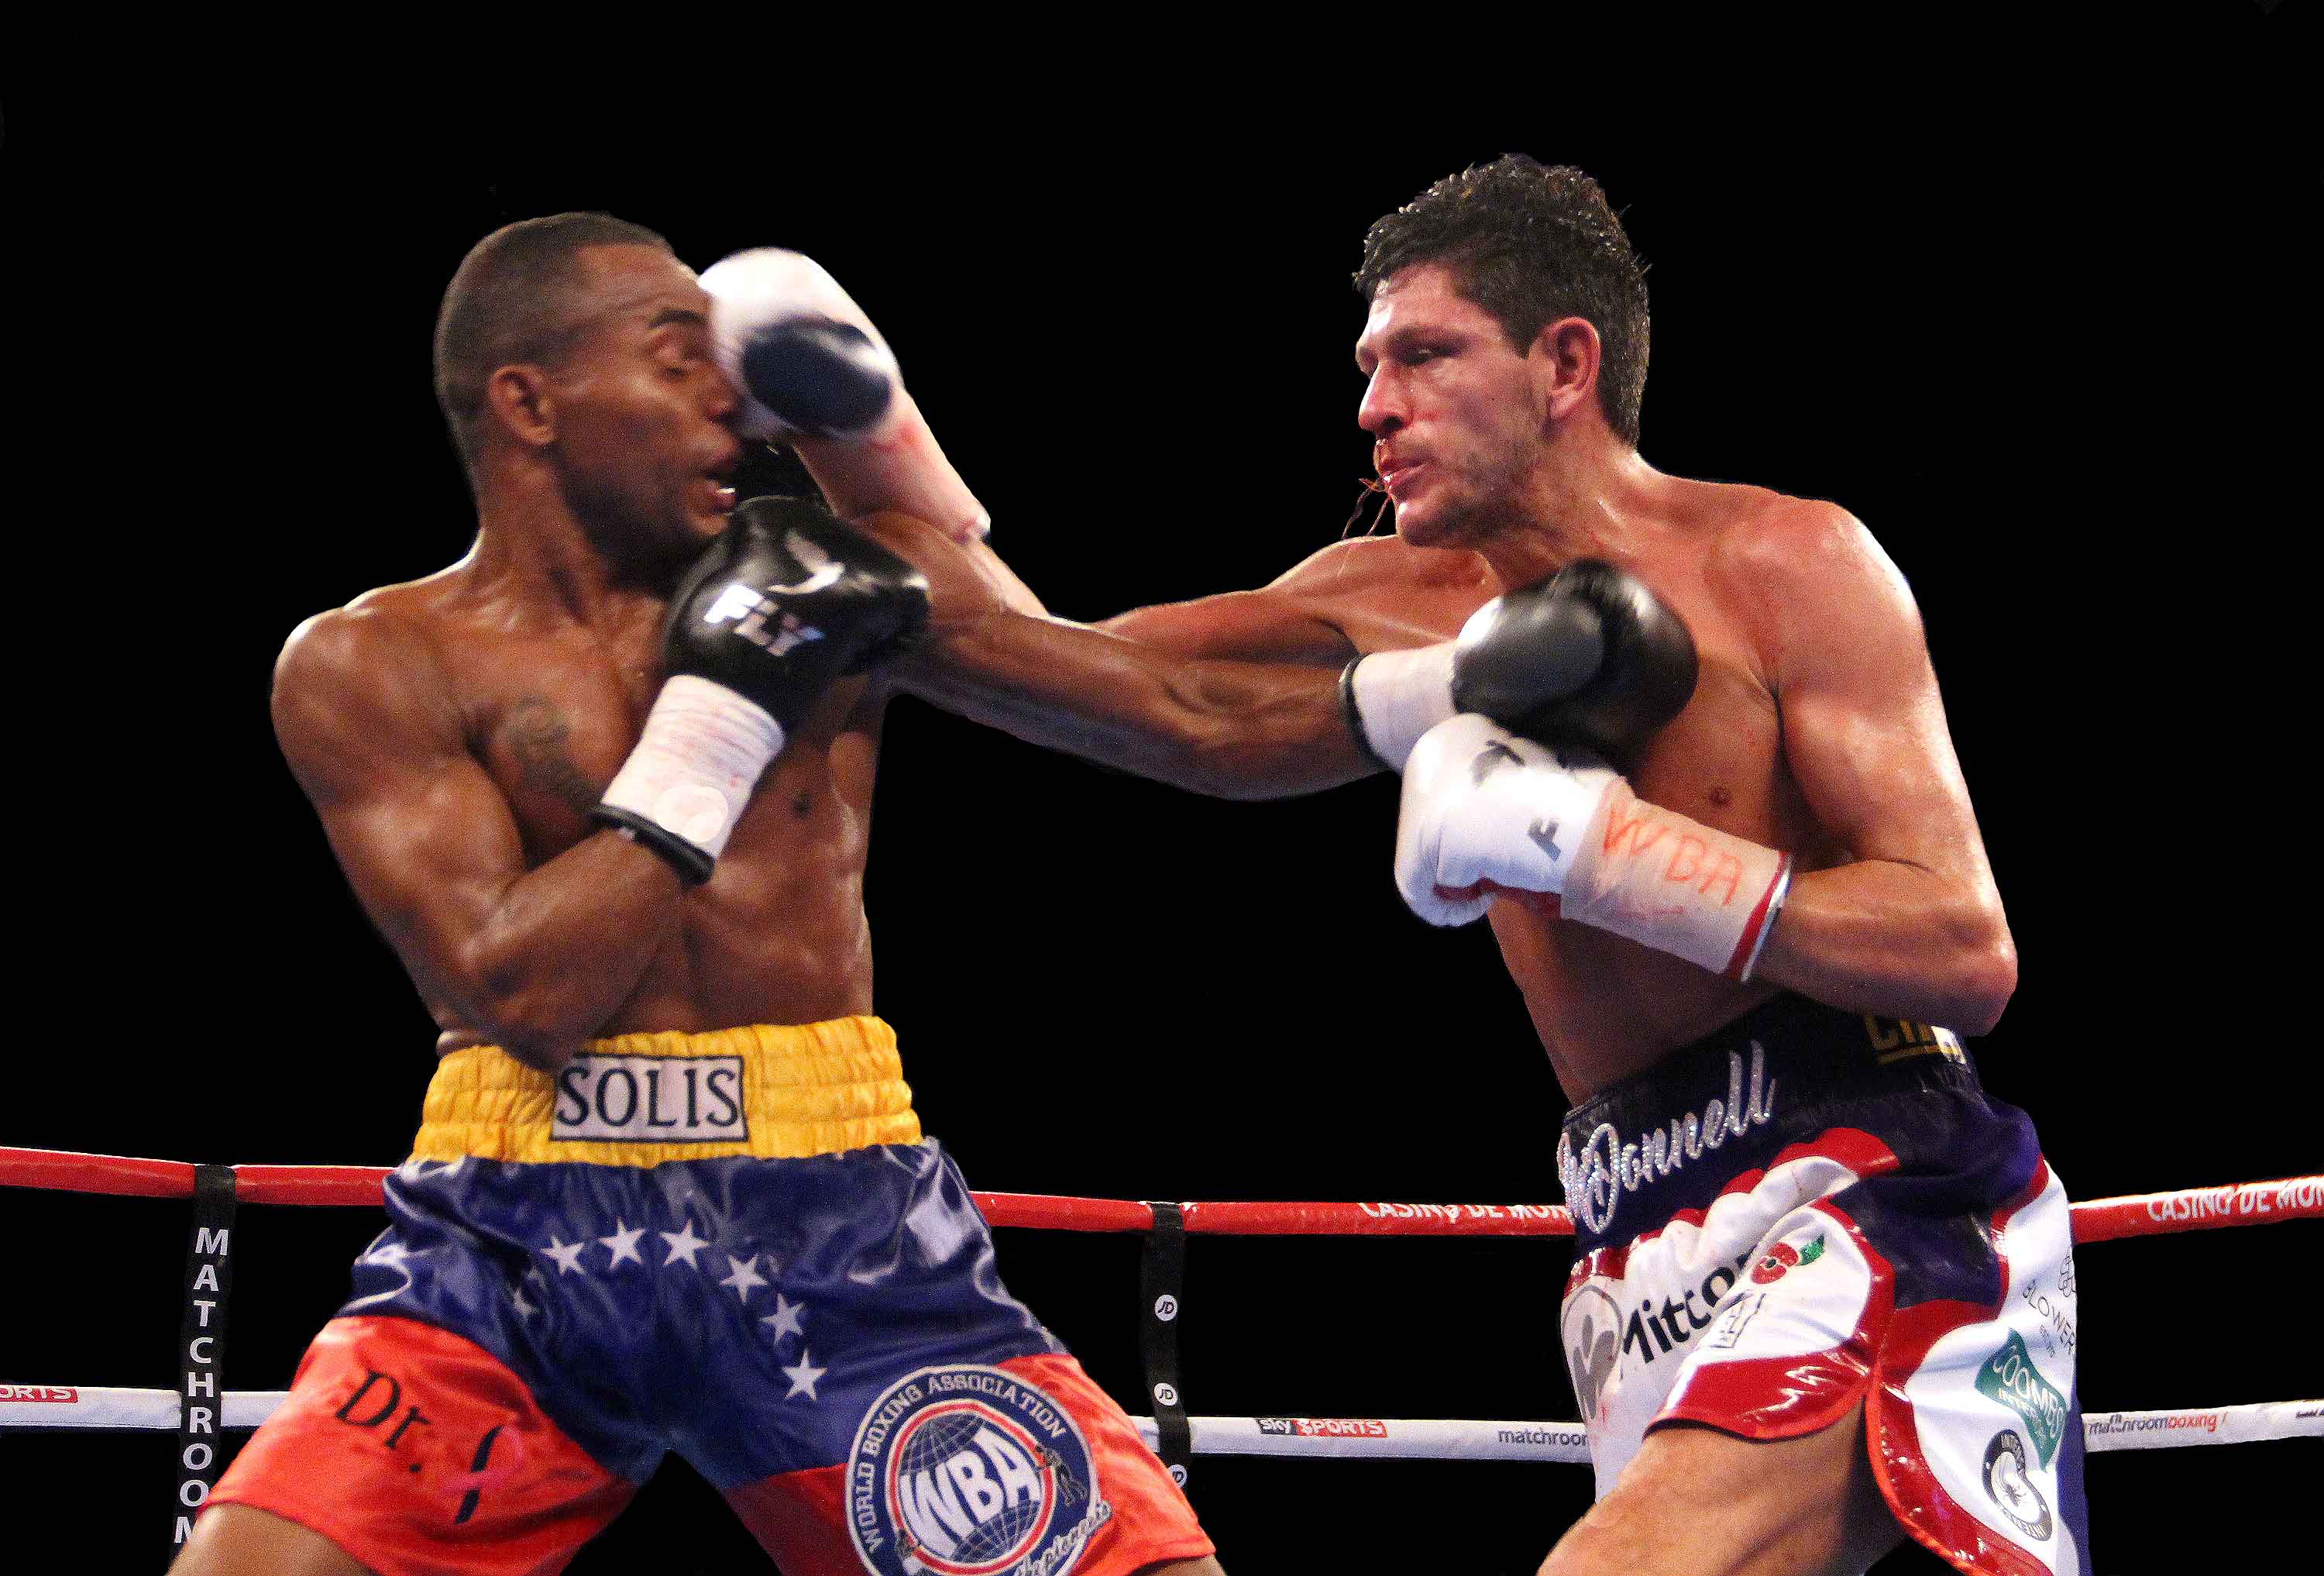 McDonnell controlled the action in the second half of the fight. (Photo: Sumio Yamada)